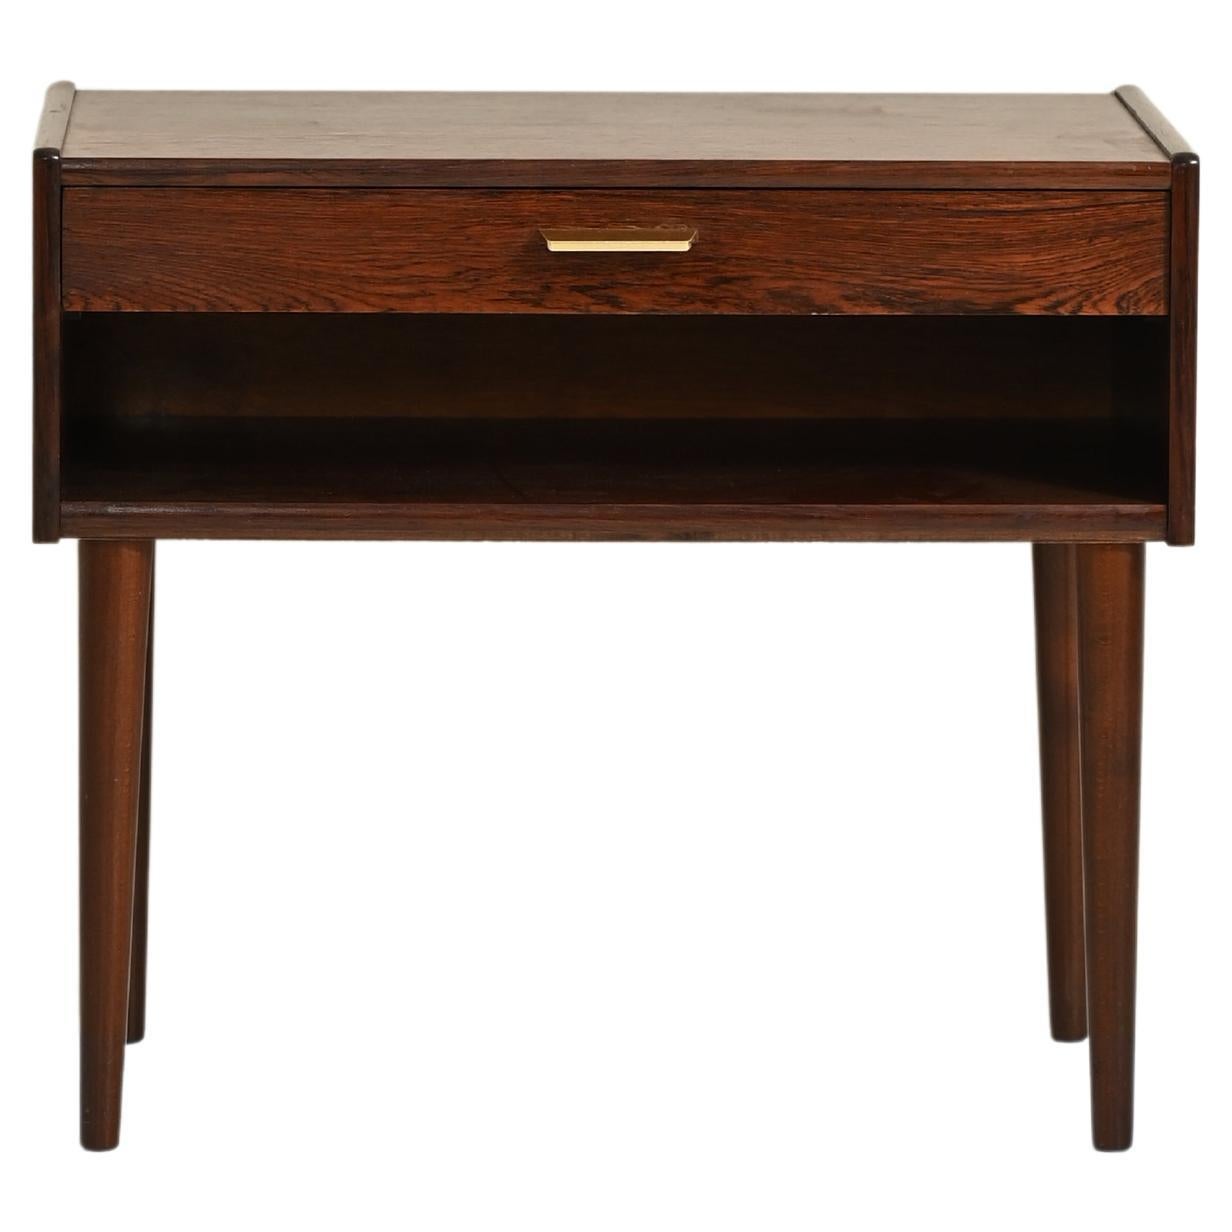 Rosewood Nightstand Signed AB Carlström & Co